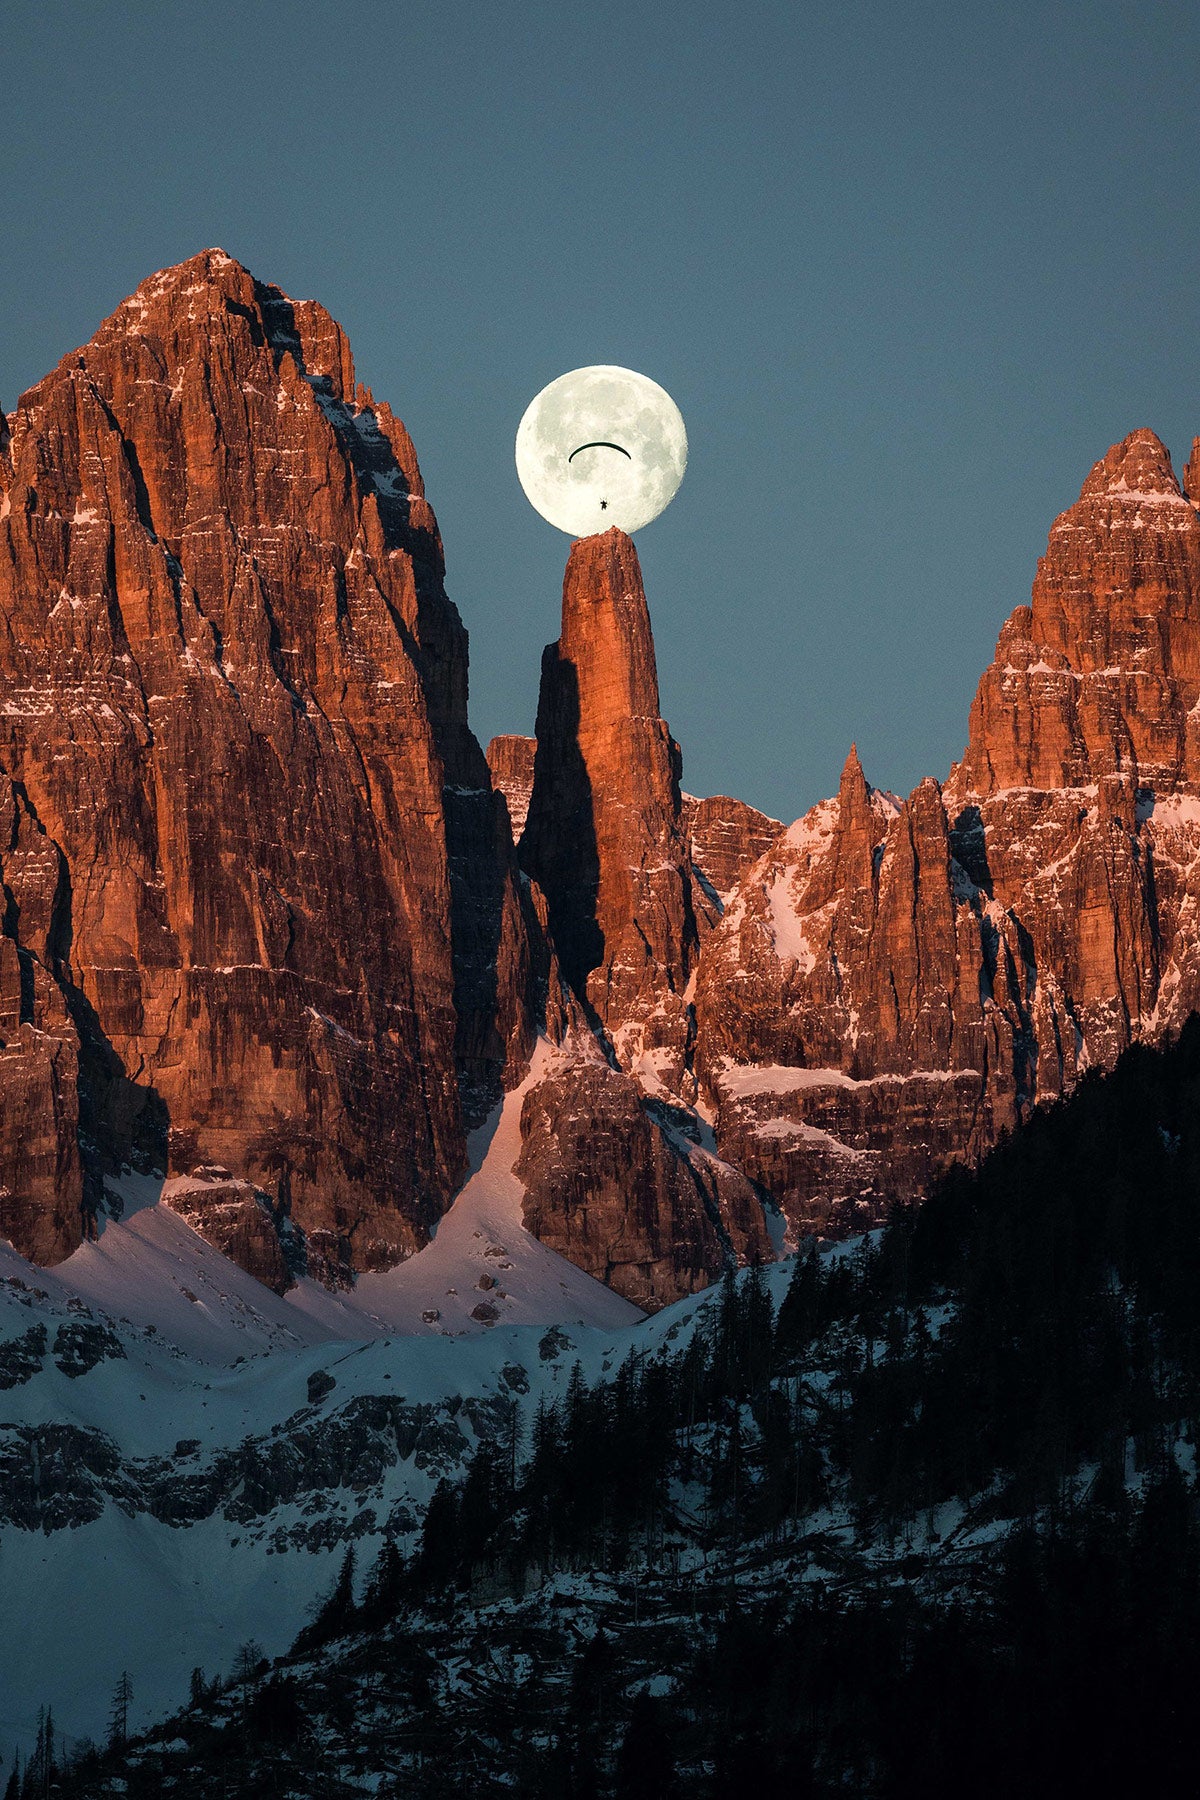 Steep red mountains stick out of the snow-covered ground with a full moon perfectly placed at the top of one spire.